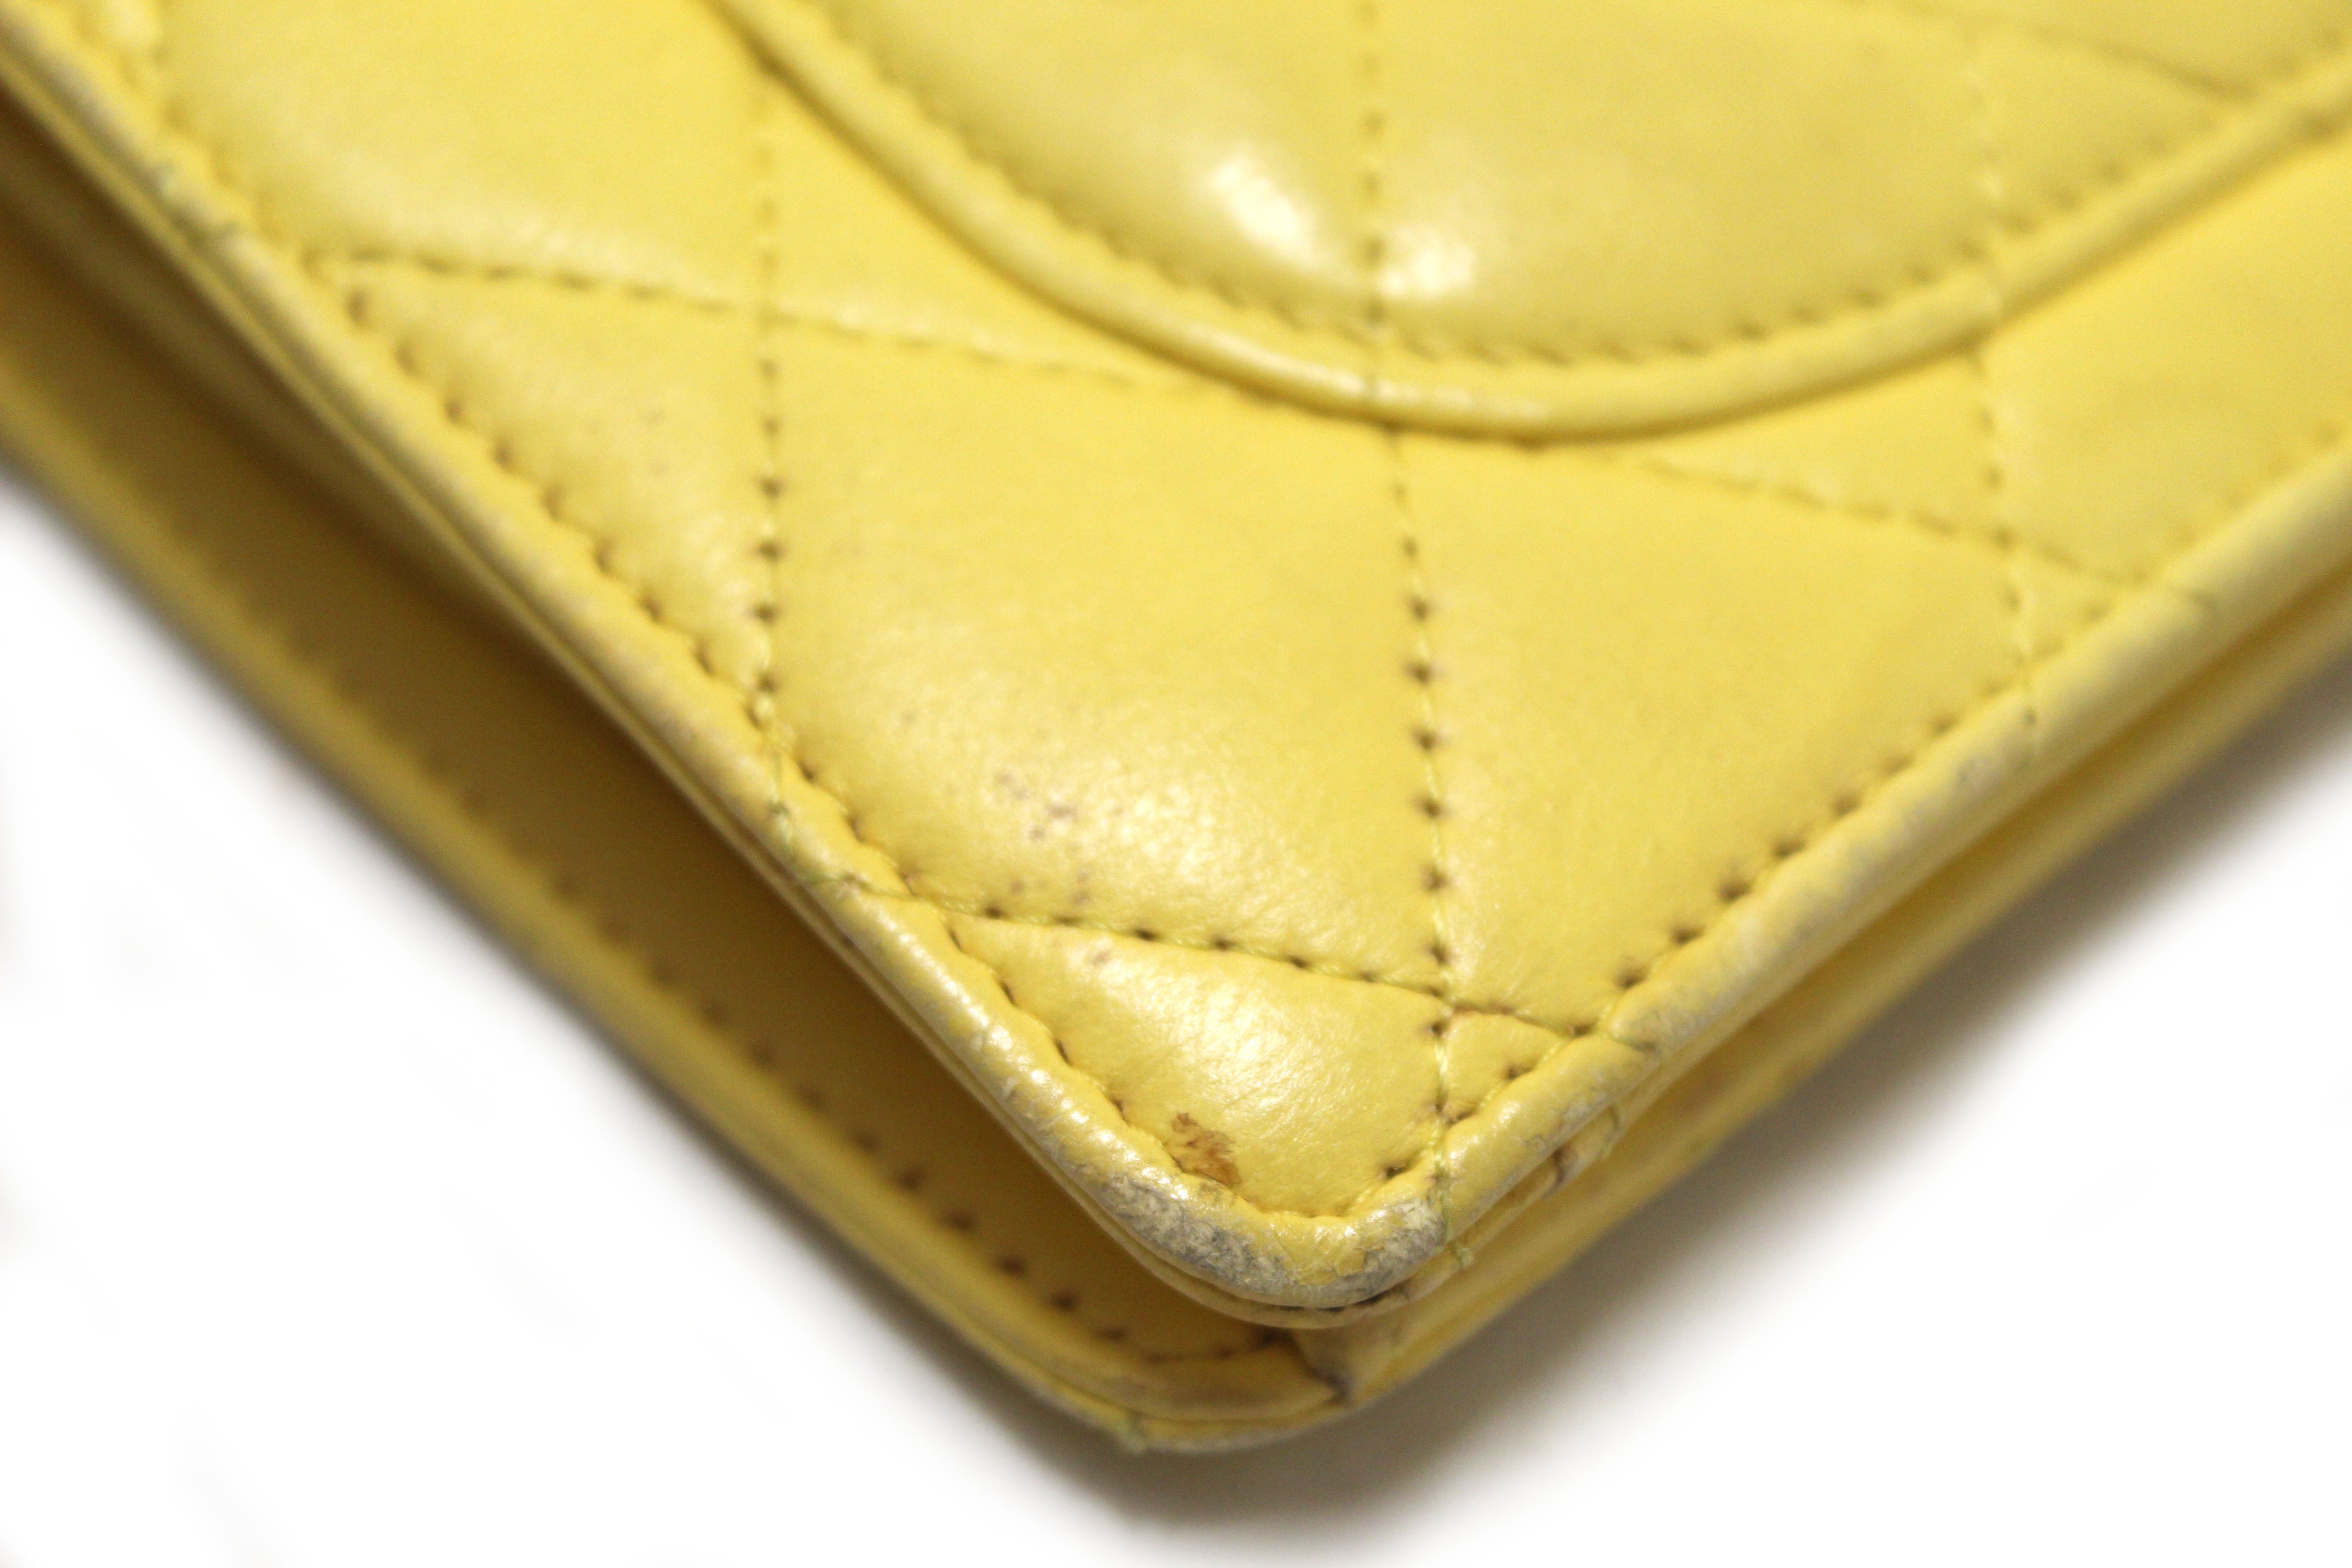 Authentic Chanel Yellow Quilted Lambskin Leather Wallet